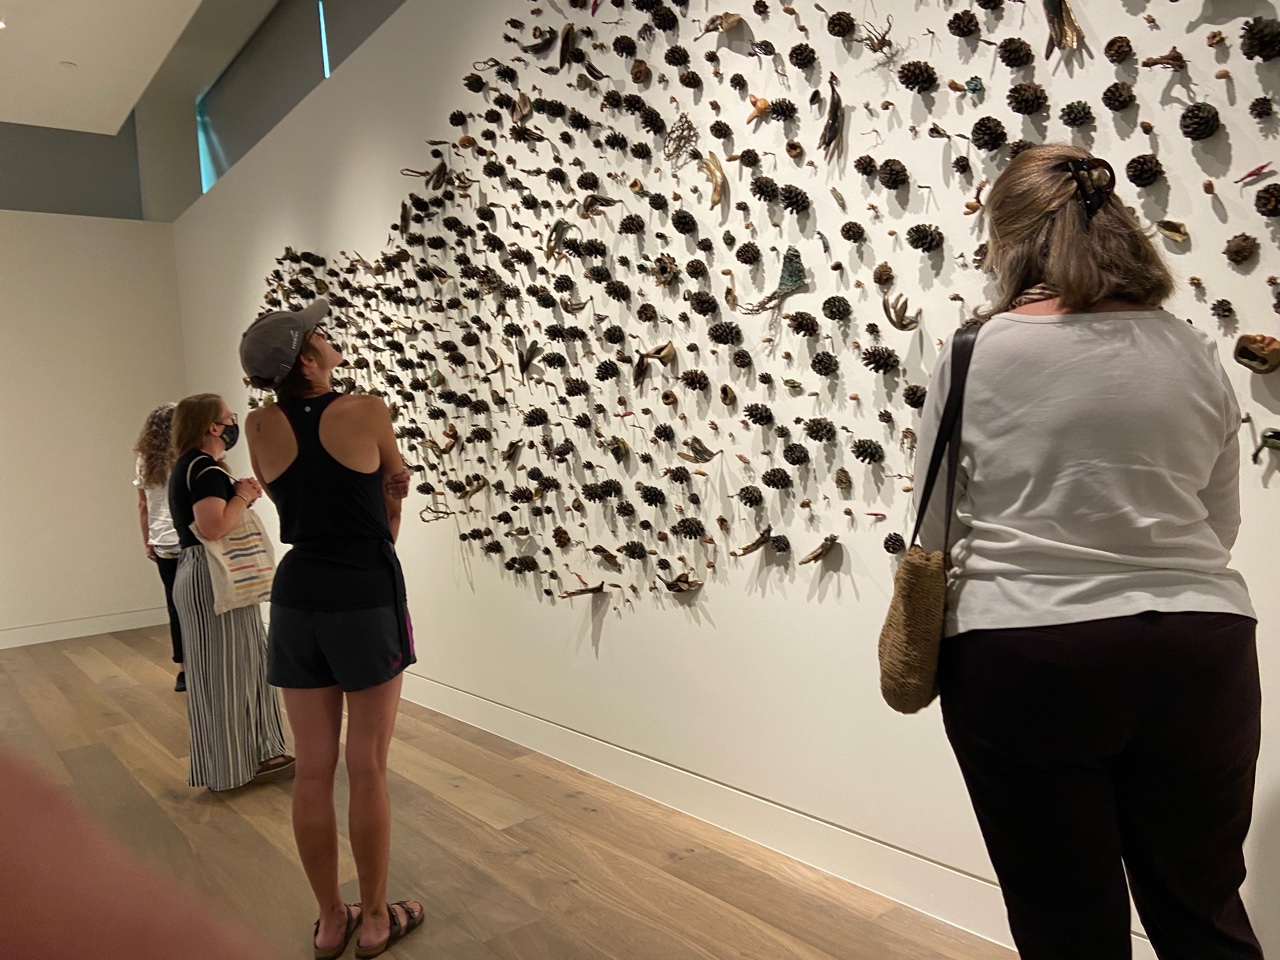 Three alumni looking at a sculpture of bronze pinecones and forest debris affixed to a wall